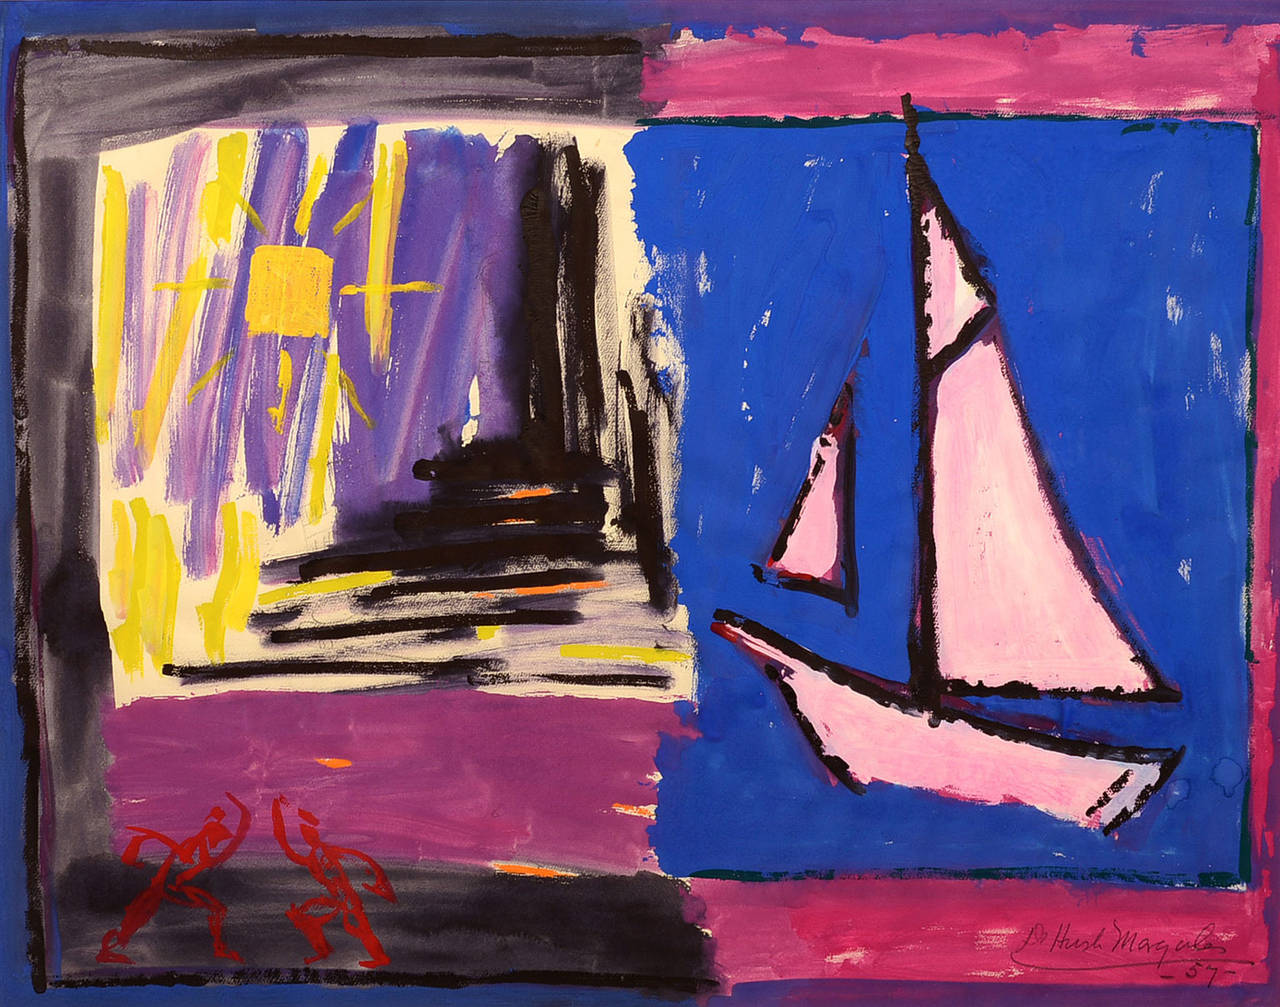 De Hirsch Margules Abstract Painting - Sailboat Dance